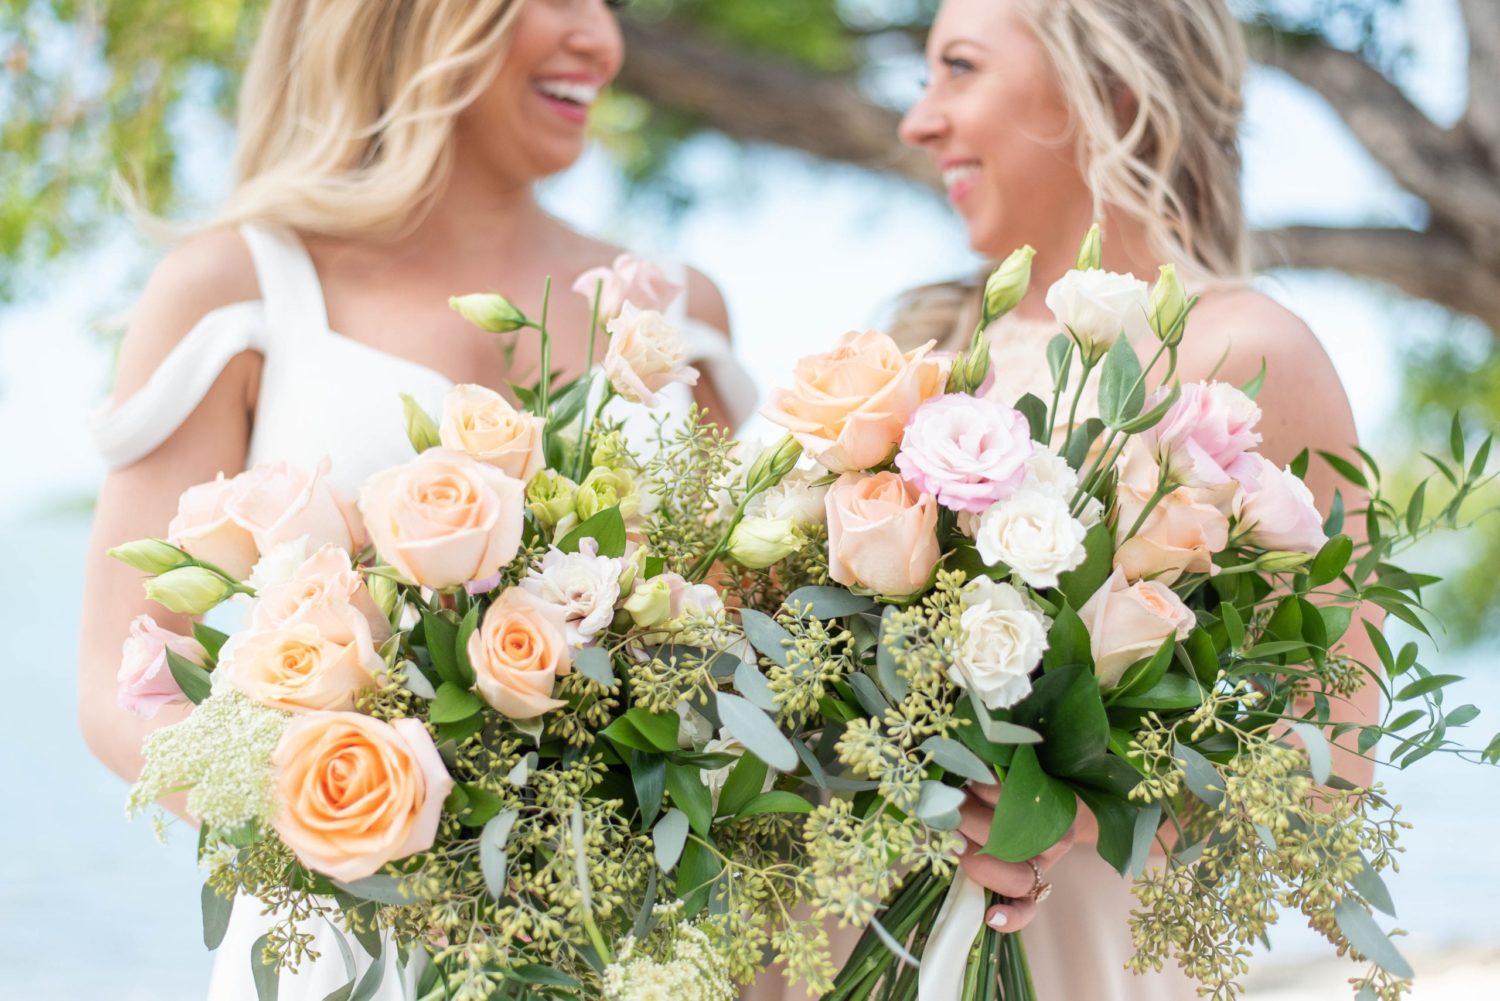 Key west marriott beachside wedding bride and bridesmaid by the beach laughing smiling at each other holding colorful pastel wedding flower bouquets